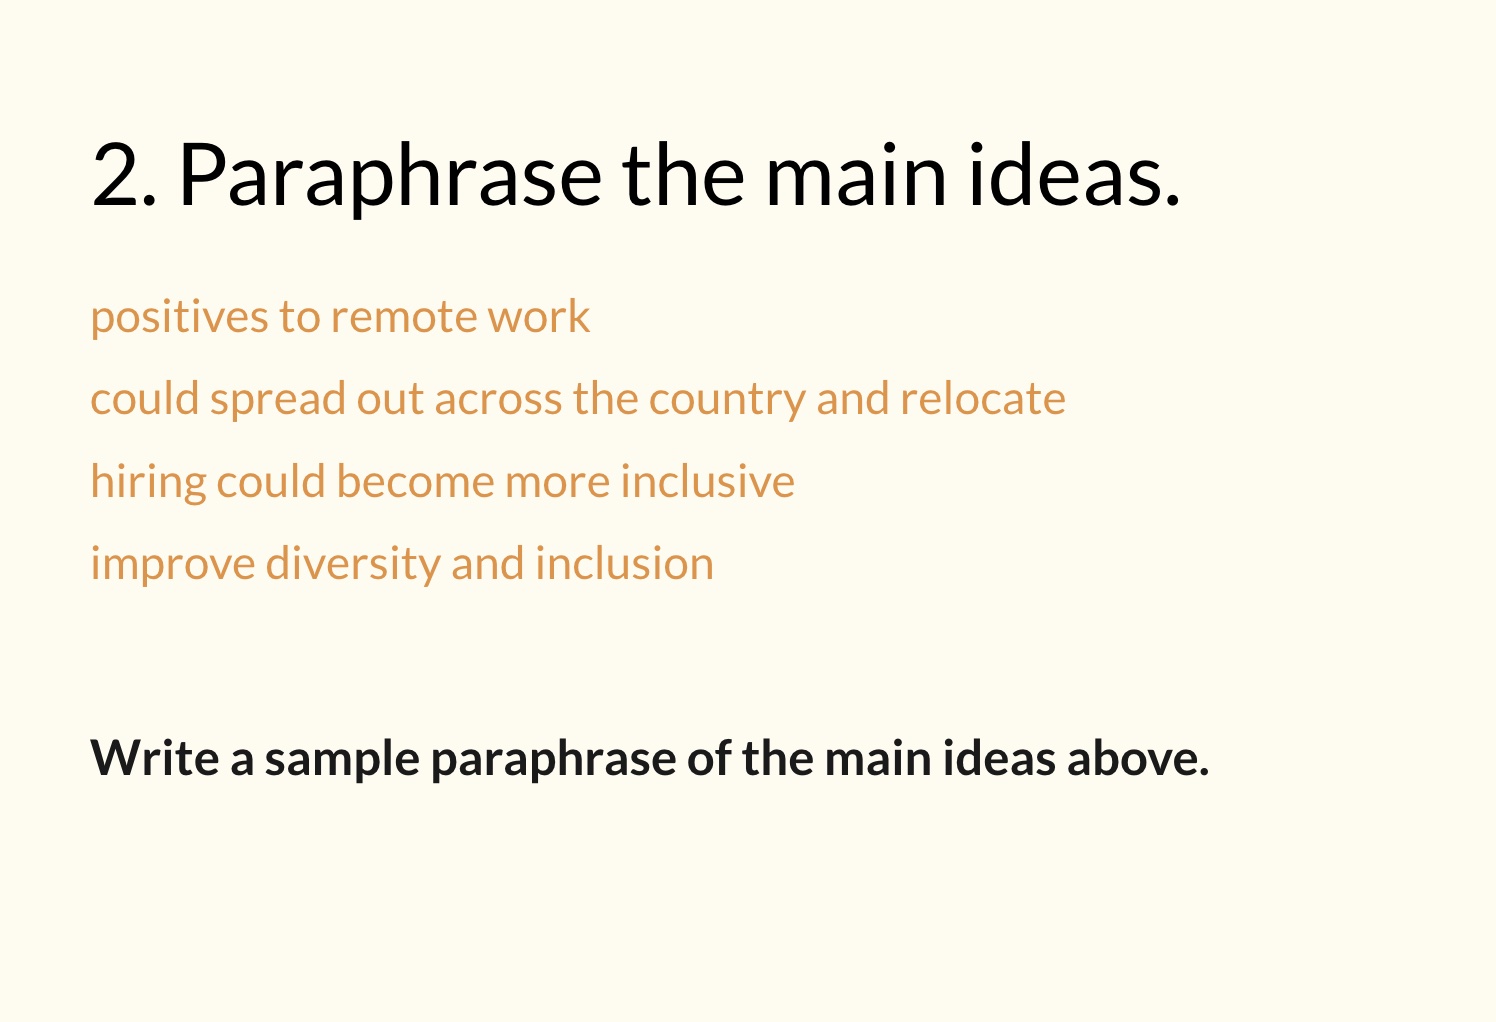 Fig. 9. Then, I isolated the highlighted phrases on the slide in Fig. 8 and asked students to pause and paraphrase these central concepts without the original paragraph available to them on-screen. This cream-colored slide contains the title “2. Paraphrase the main ideas” in black font, beneath which are four phrases in orange font: “positives to remote work,” “could spread out across the country and relocate,” “hiring could become more inclusive,” and “improve diversity and inclusion.” Beneath these four orange phrases is a sentence in black font that reads, “Write a sample paraphrase of the main ideas above.”